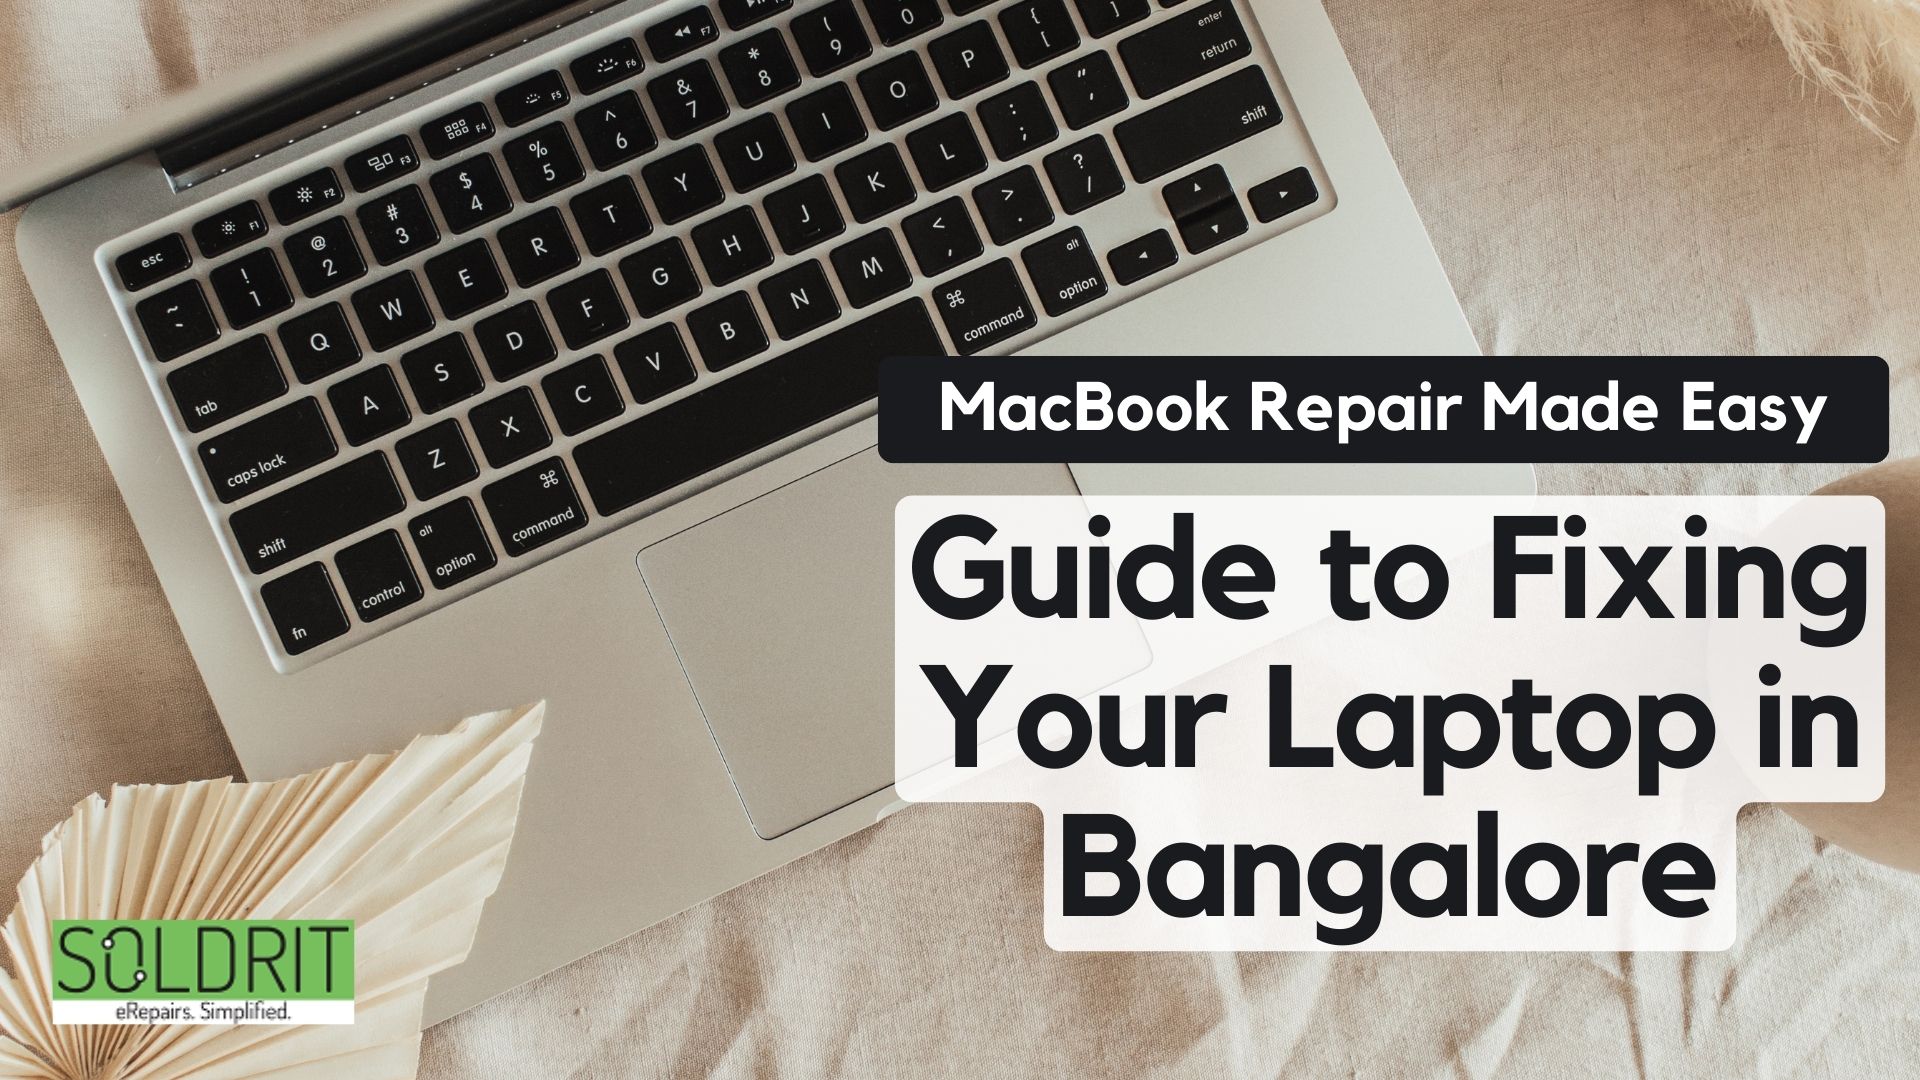 Guide to Fixing Your Laptop in Bangalore